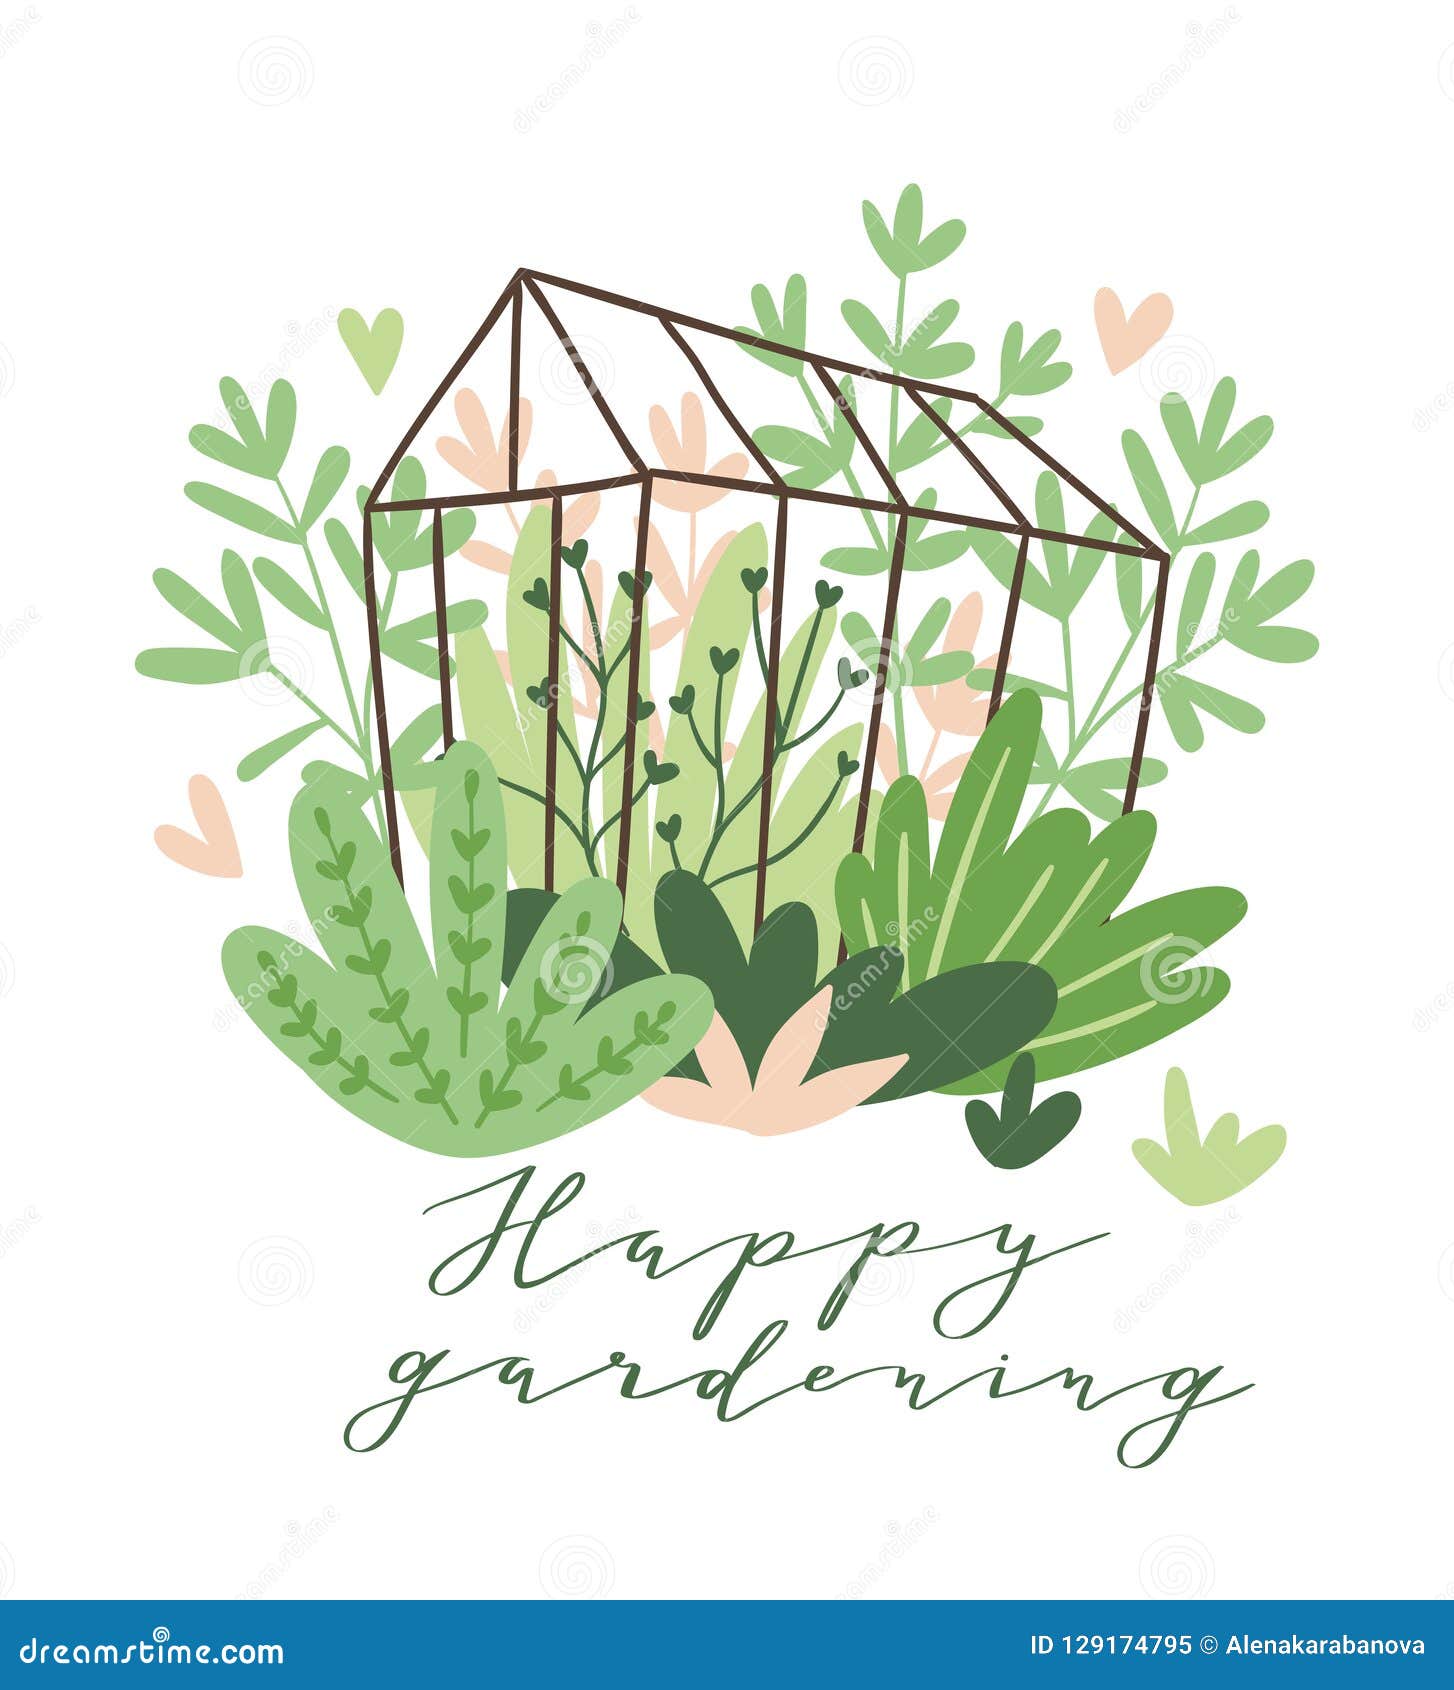 cute  seasonal greeting card - growing flowers and plants in the greenhouse with text `happy gardening`.